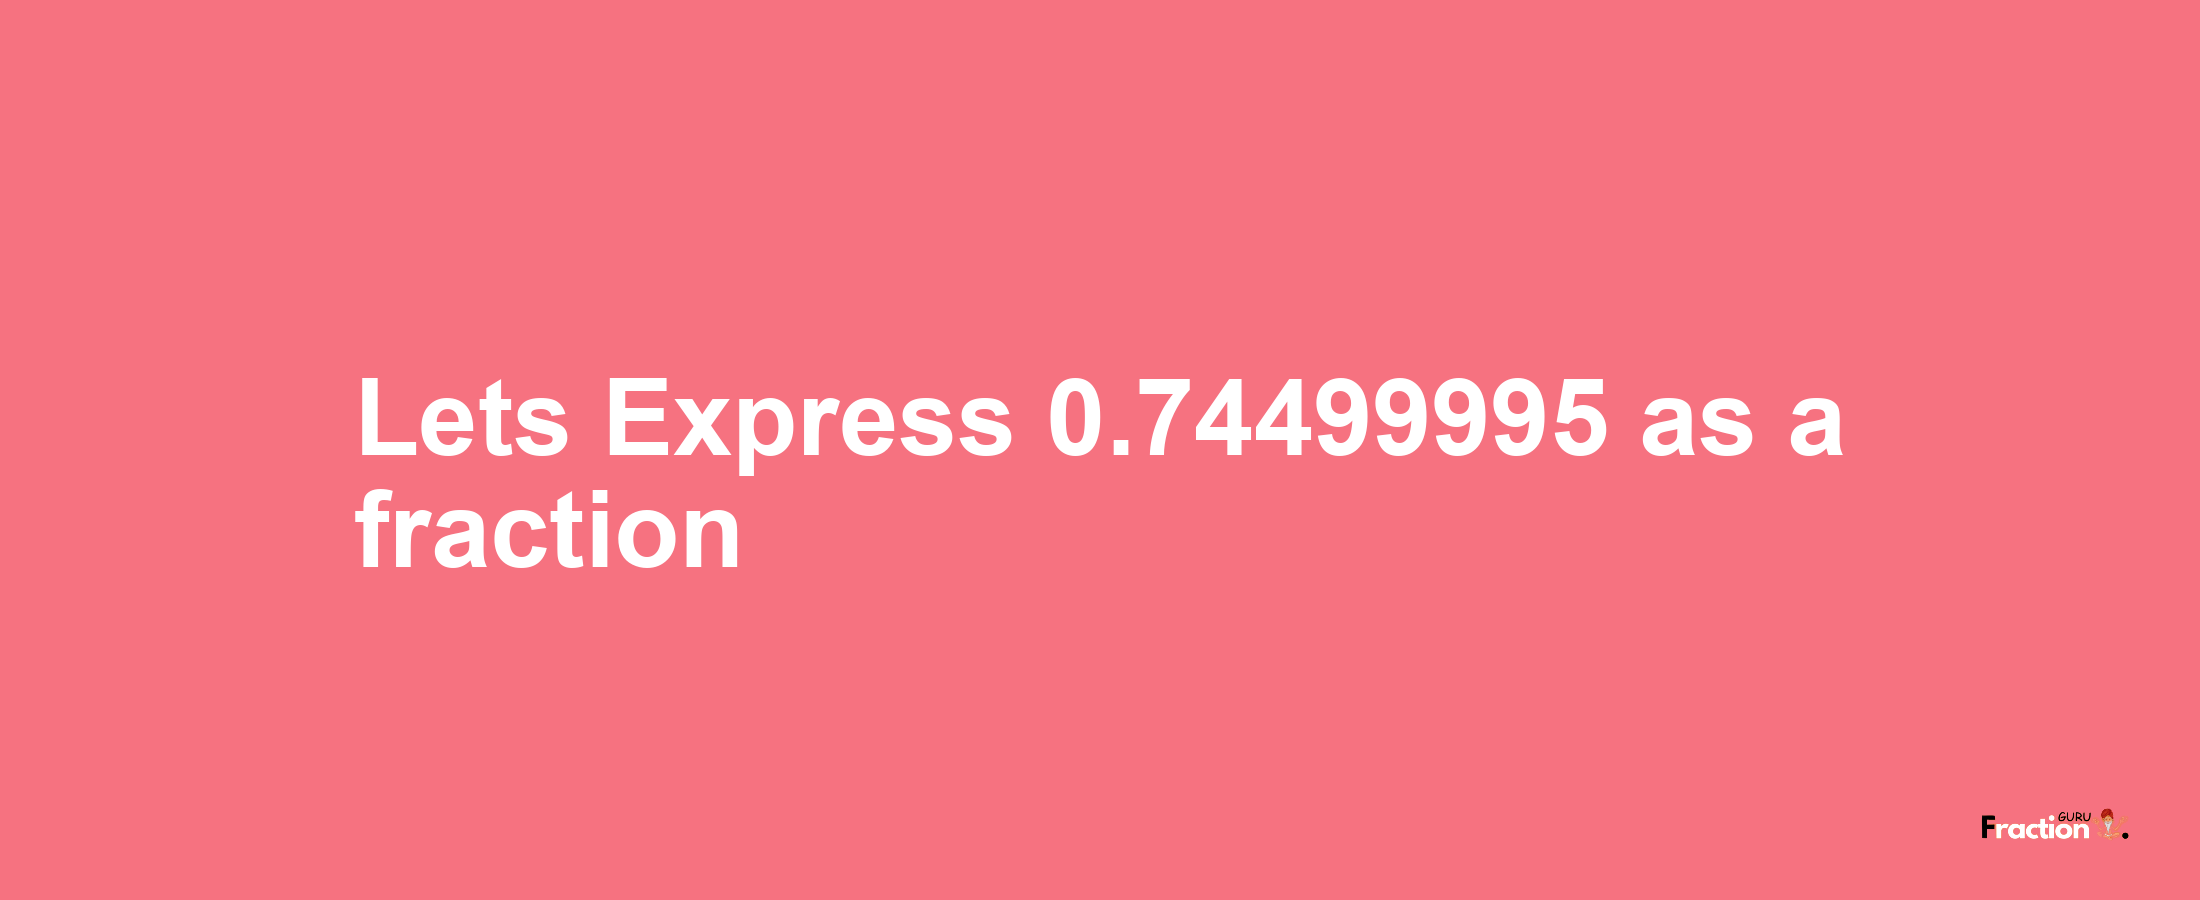 Lets Express 0.74499995 as afraction